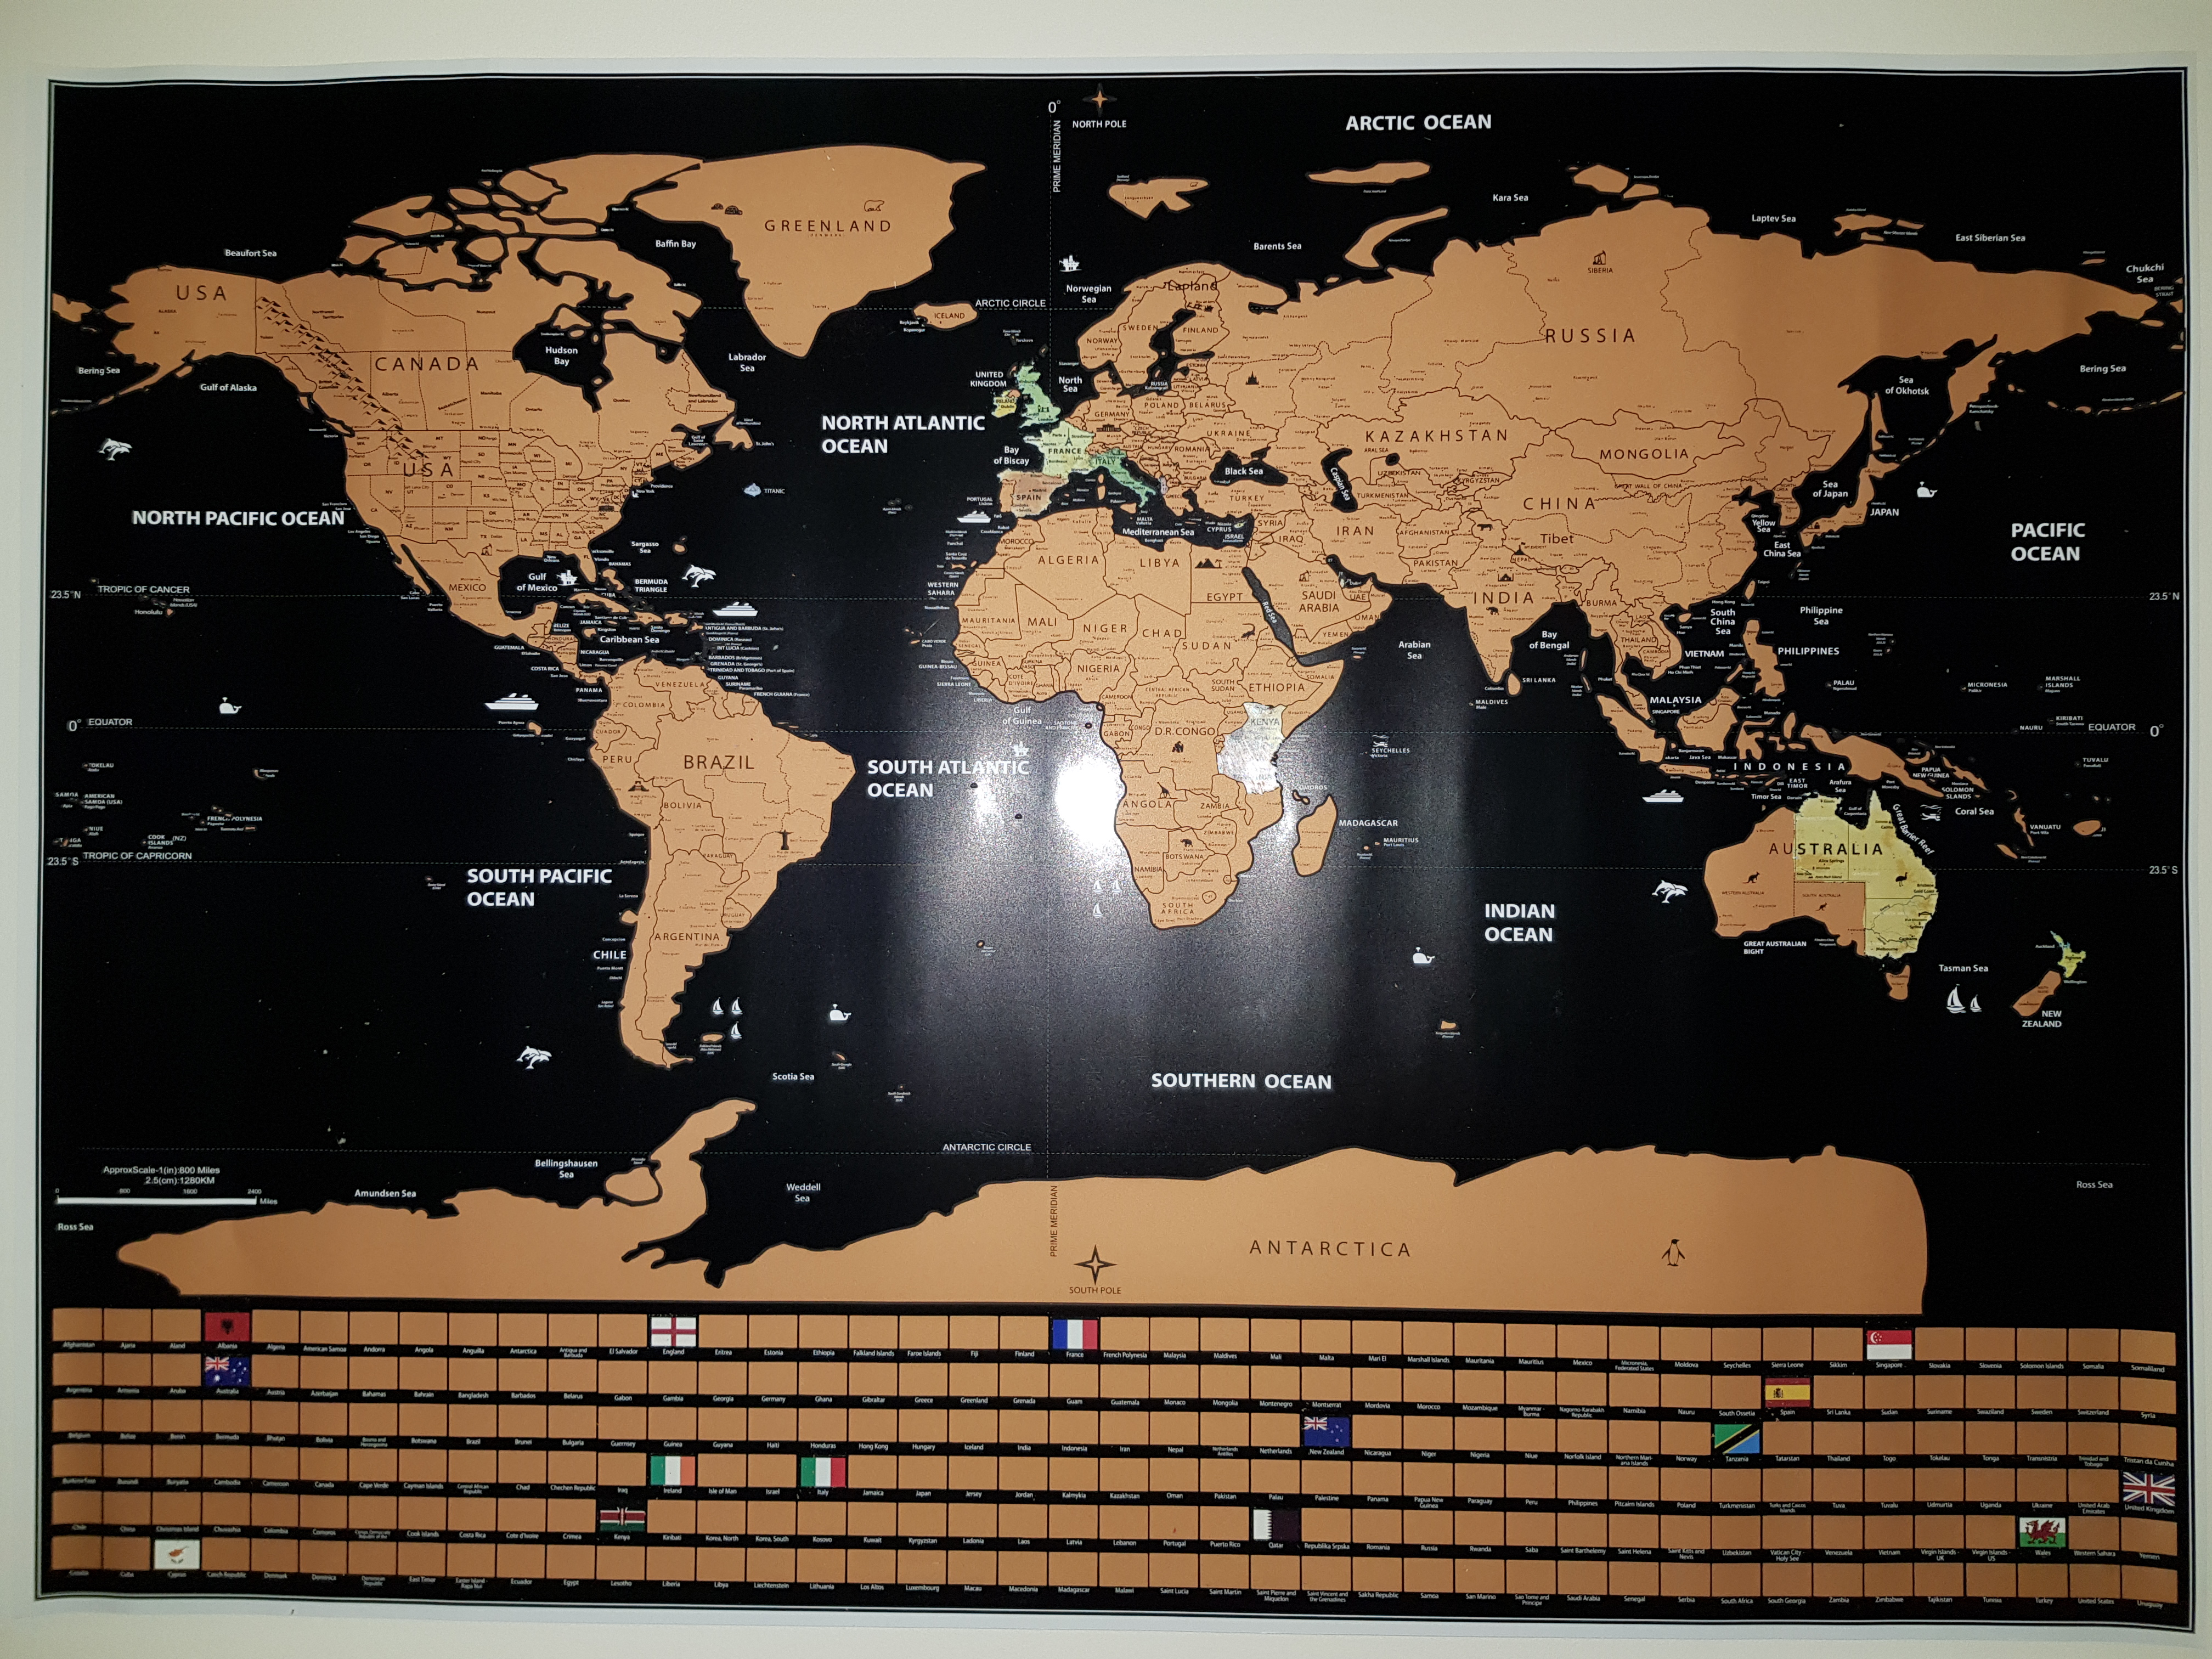 A map of the world where the water is black and the land is gold foil which can be scratched off. At the bottom of the map is scratch off boxes covering the flags of every country